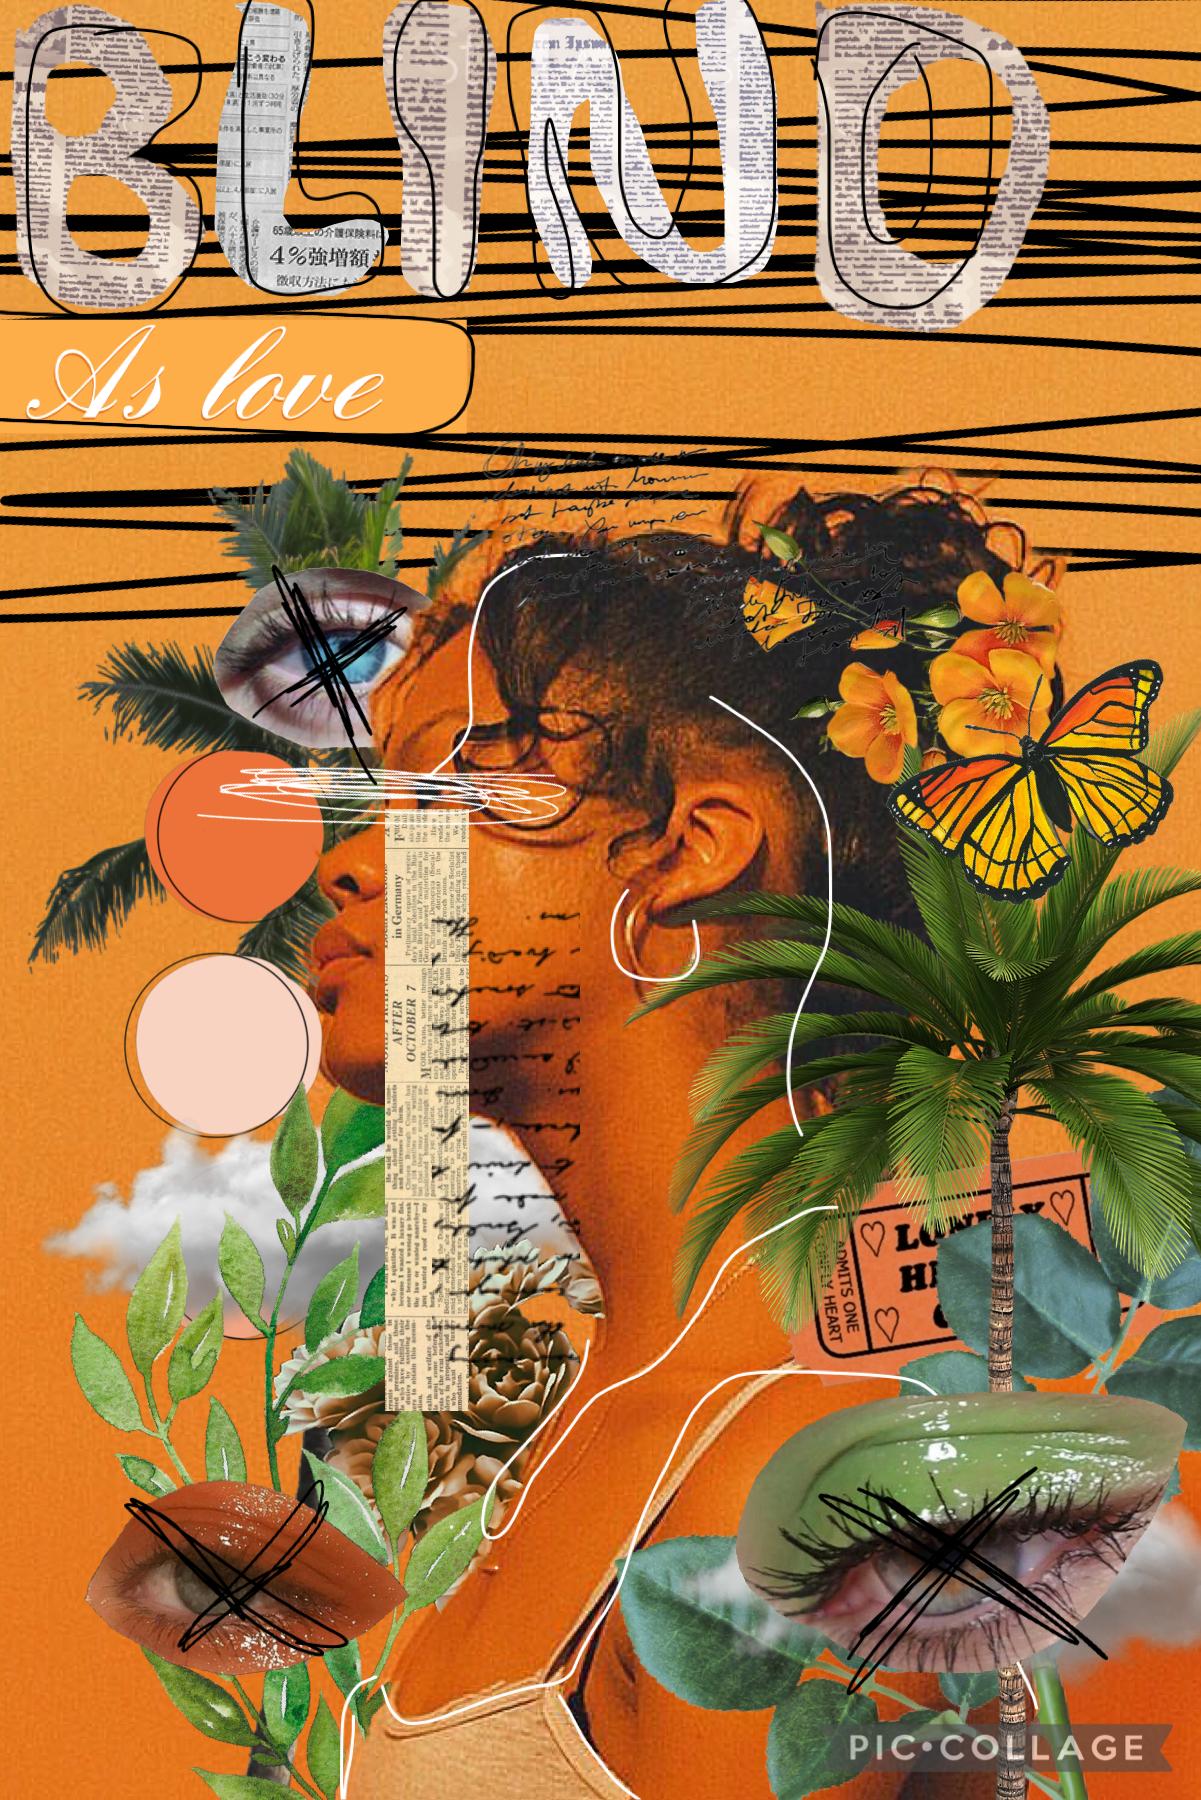 ✨🧡🌴8•2•21🌴🧡✨
I’ve been seeing lots of collages like this so I decided to make one
